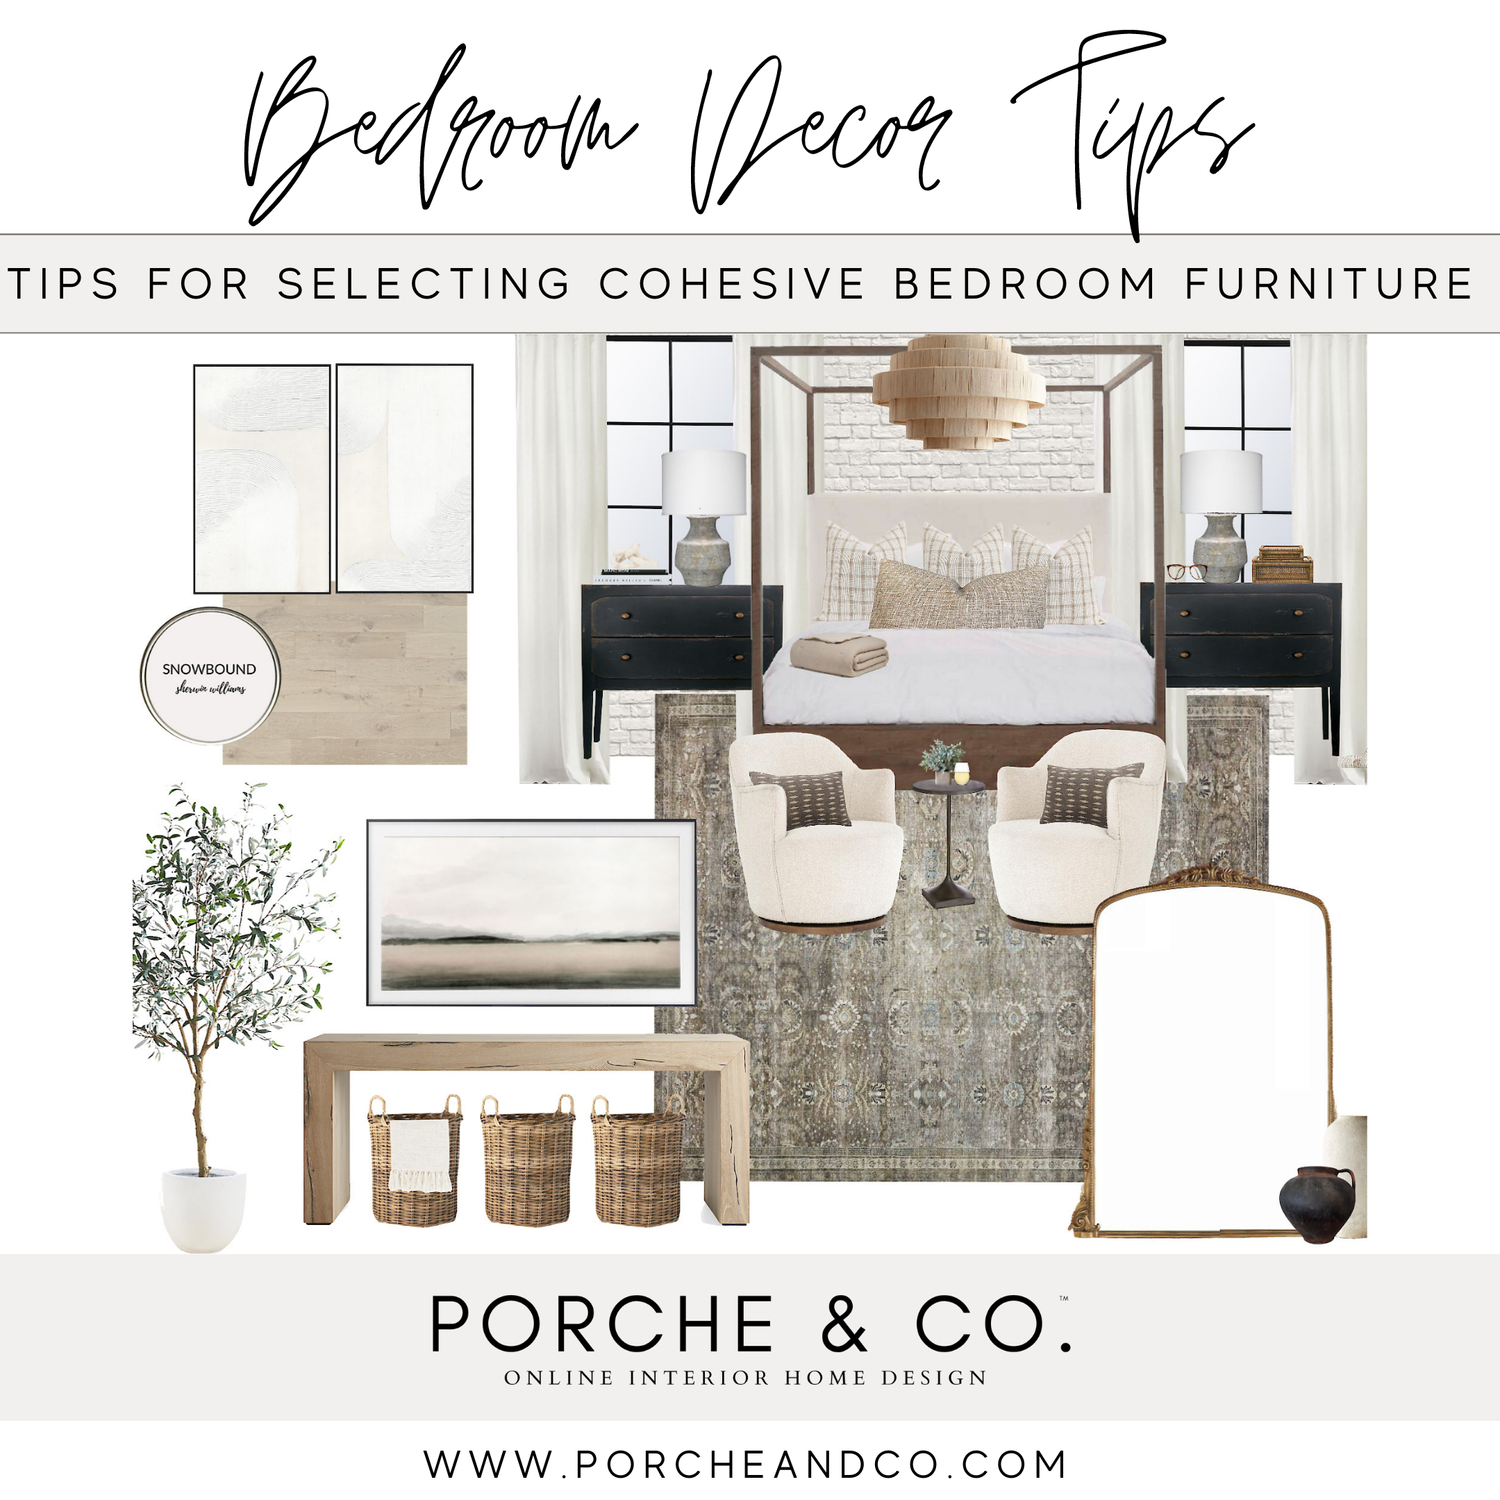 Our Tips for Selecting Cohesive Bedroom Furniture — Porche & Co.